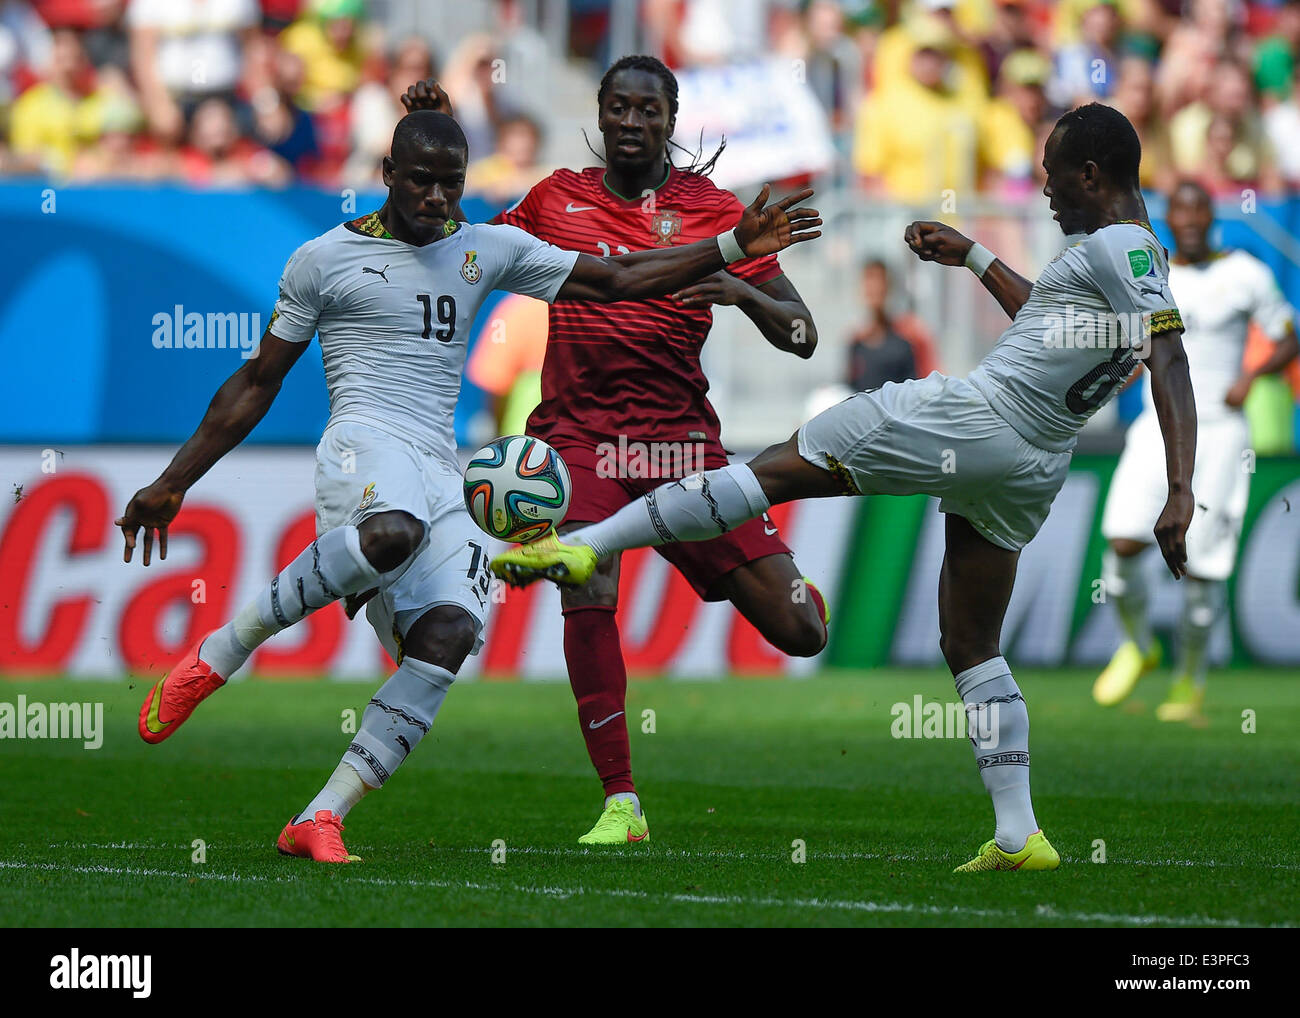 Brasilia, Brazil. 26th June, 2014. Portugal's Eder (C) vies with Ghana's Jonathan Mensah (L) and Emmanuel Agyemang-Badu during a Group G match between Portugal and Ghana of 2014 FIFA World Cup at the Estadio Nacional Stadium in Brasilia, Brazil, June 26, 2014. Portugal won 2-1 over Ghana on Thursday. © Qi Heng/Xinhua/Alamy Live News Stock Photo